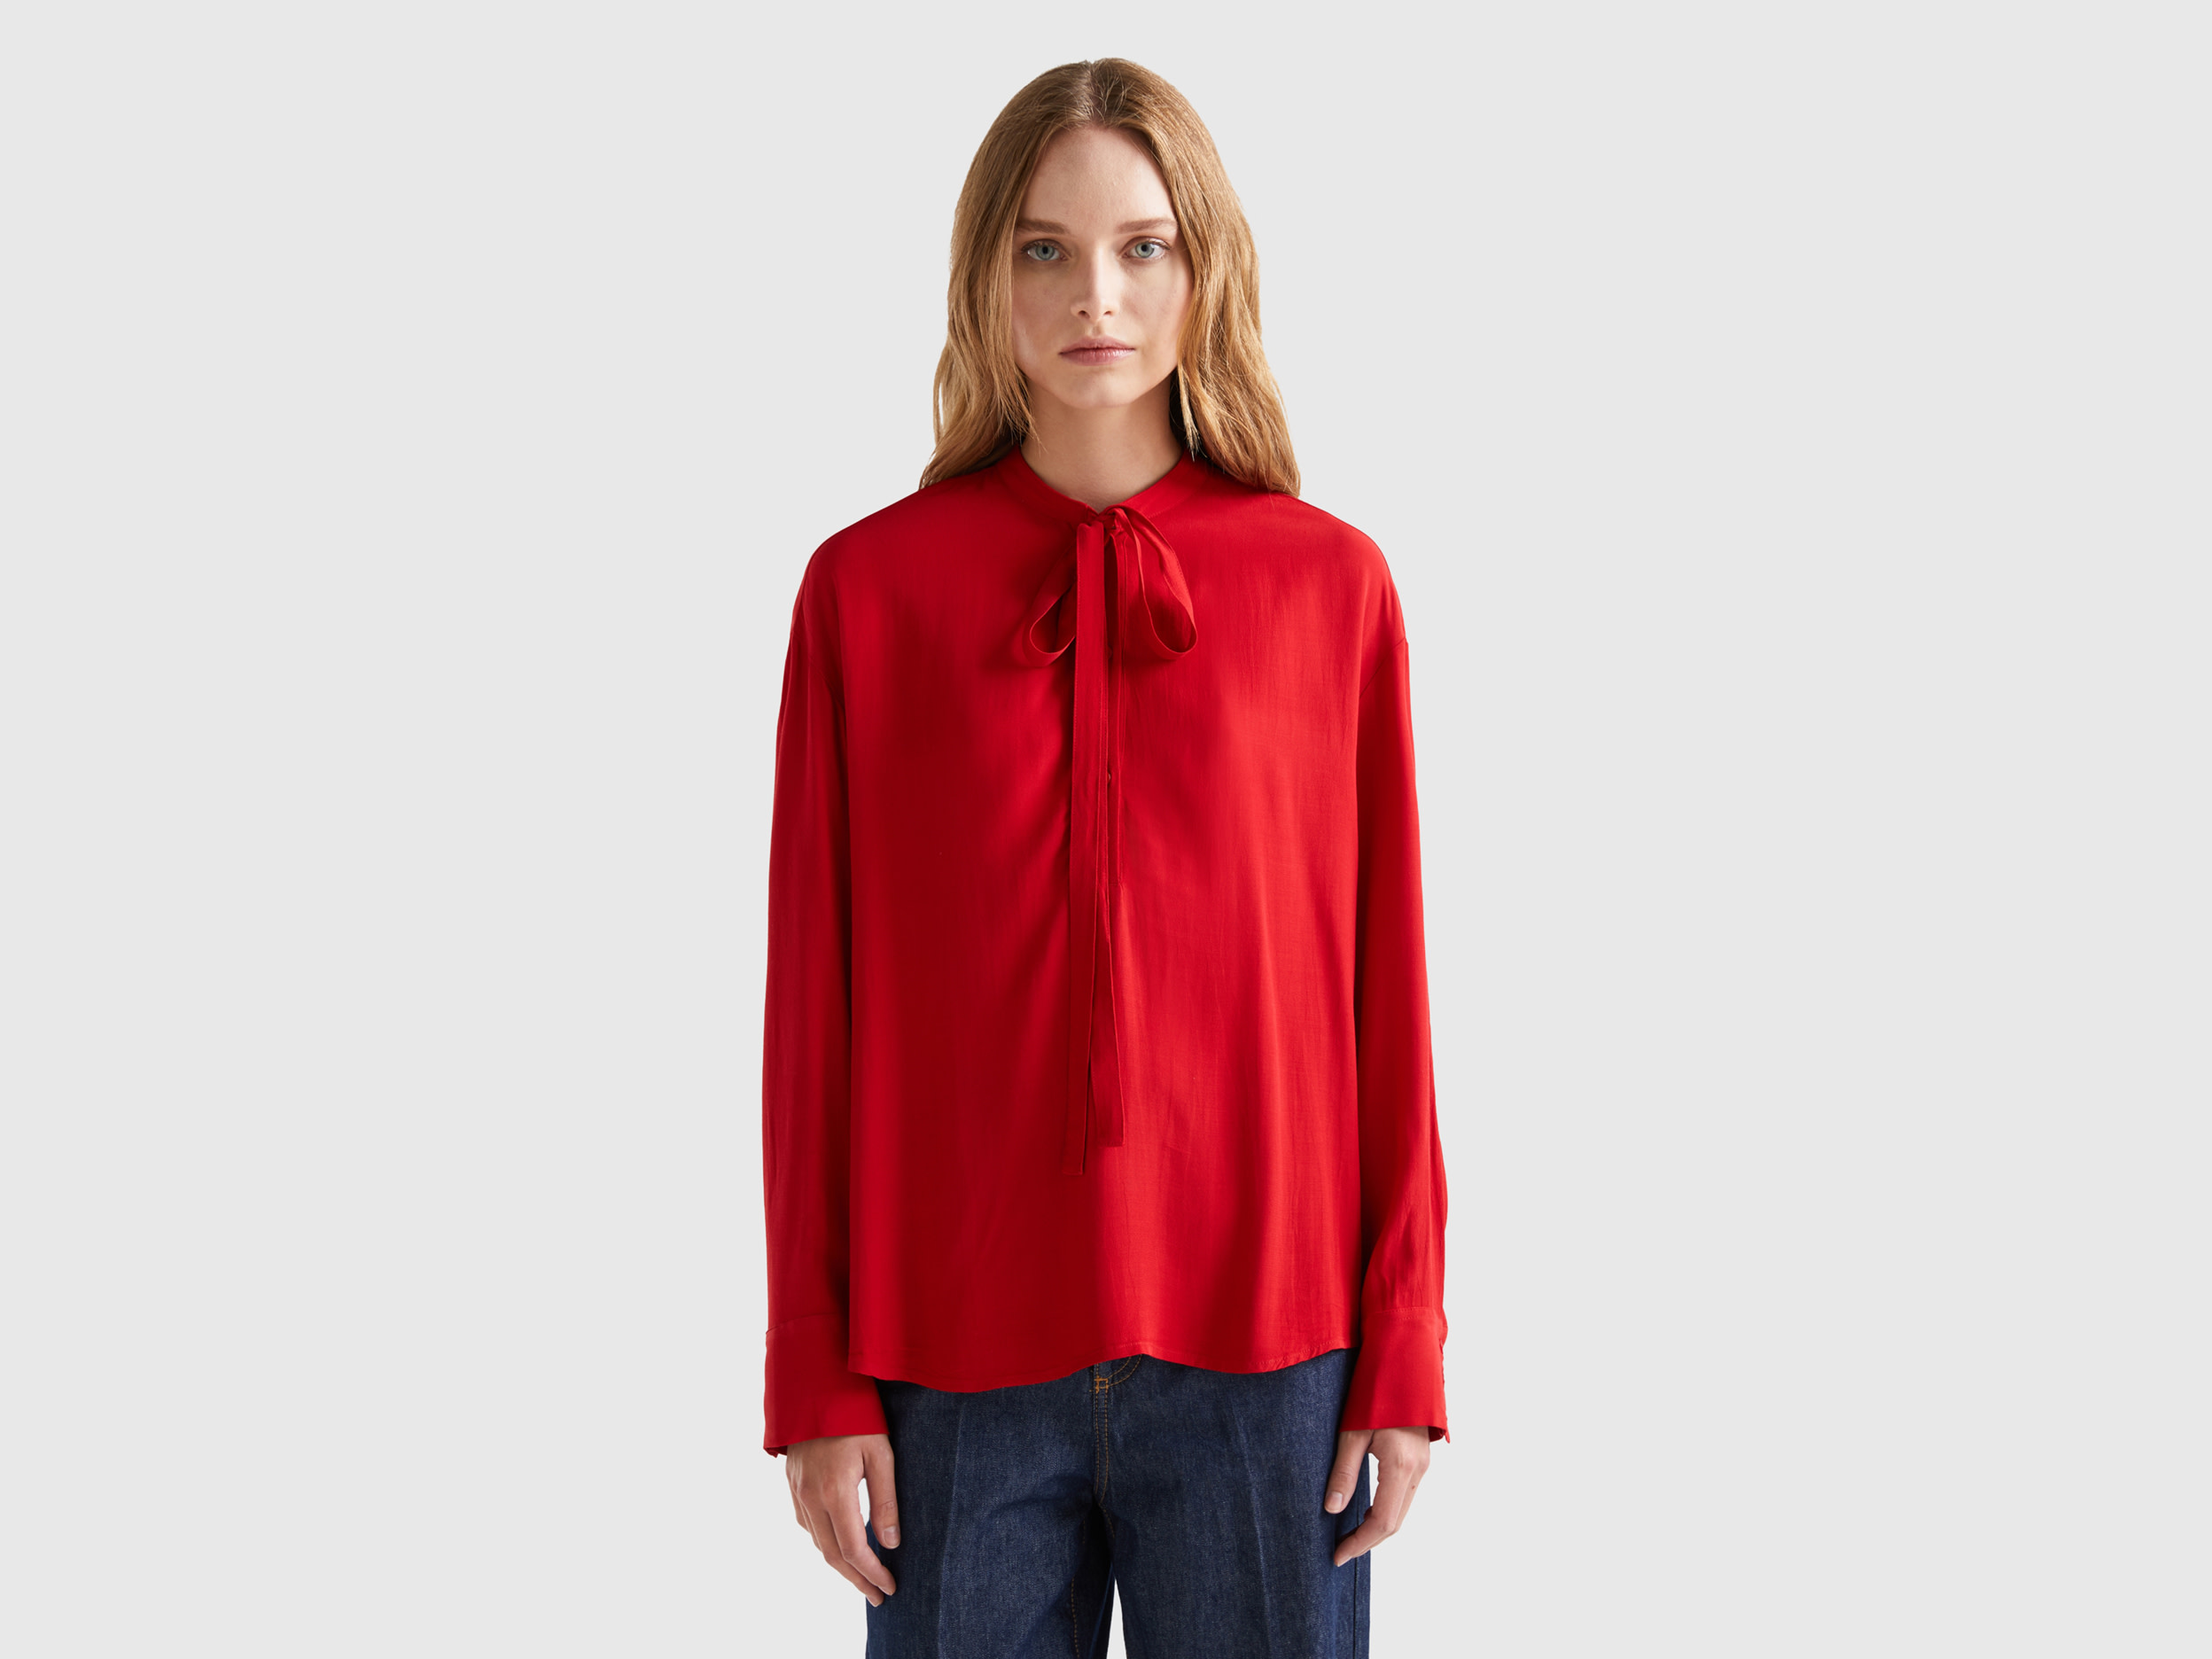 Benetton, Flowy Blouse With Laces, size S, Red, Women